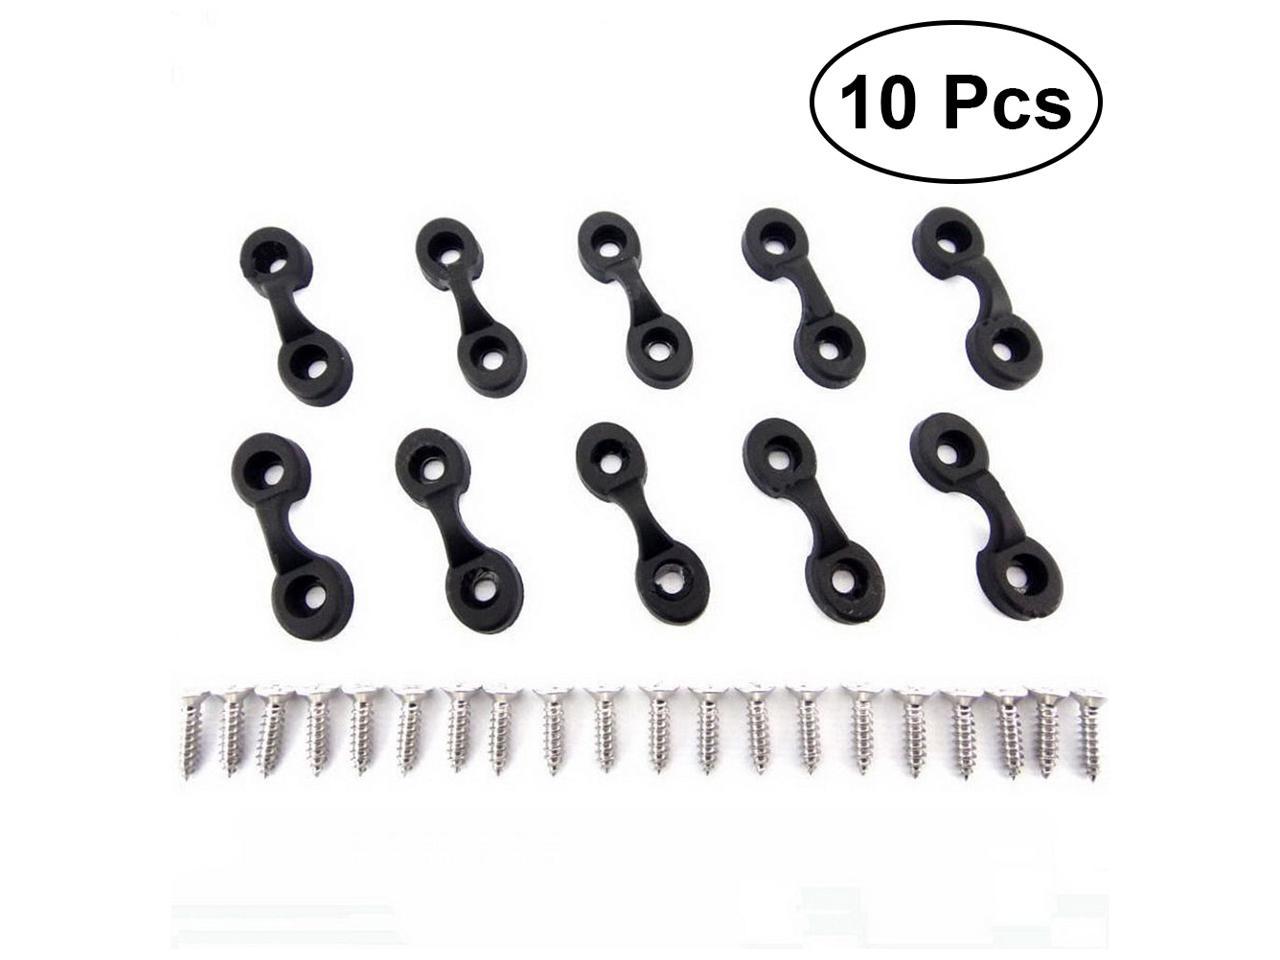 10PCS Kayak Oval D-Ring with Screw Kit Deck Loop Mounting Tie Down Canoe Boat 